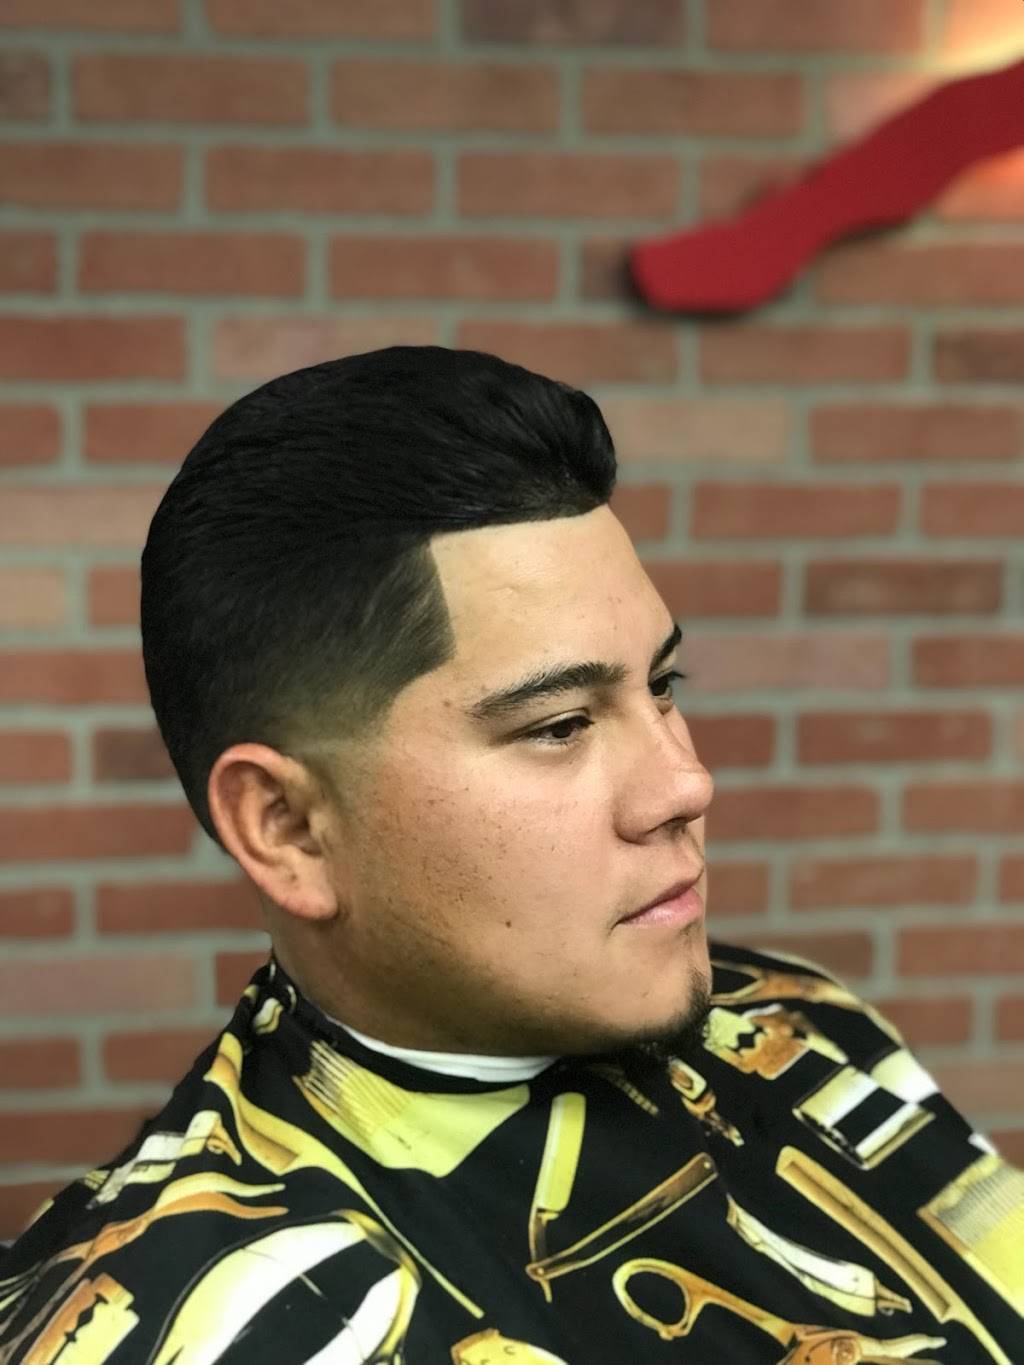 Perfected Talent Hair Salon And Barbershop | 508 50th St, Lubbock, TX 79404 | Phone: (806) 549-4901